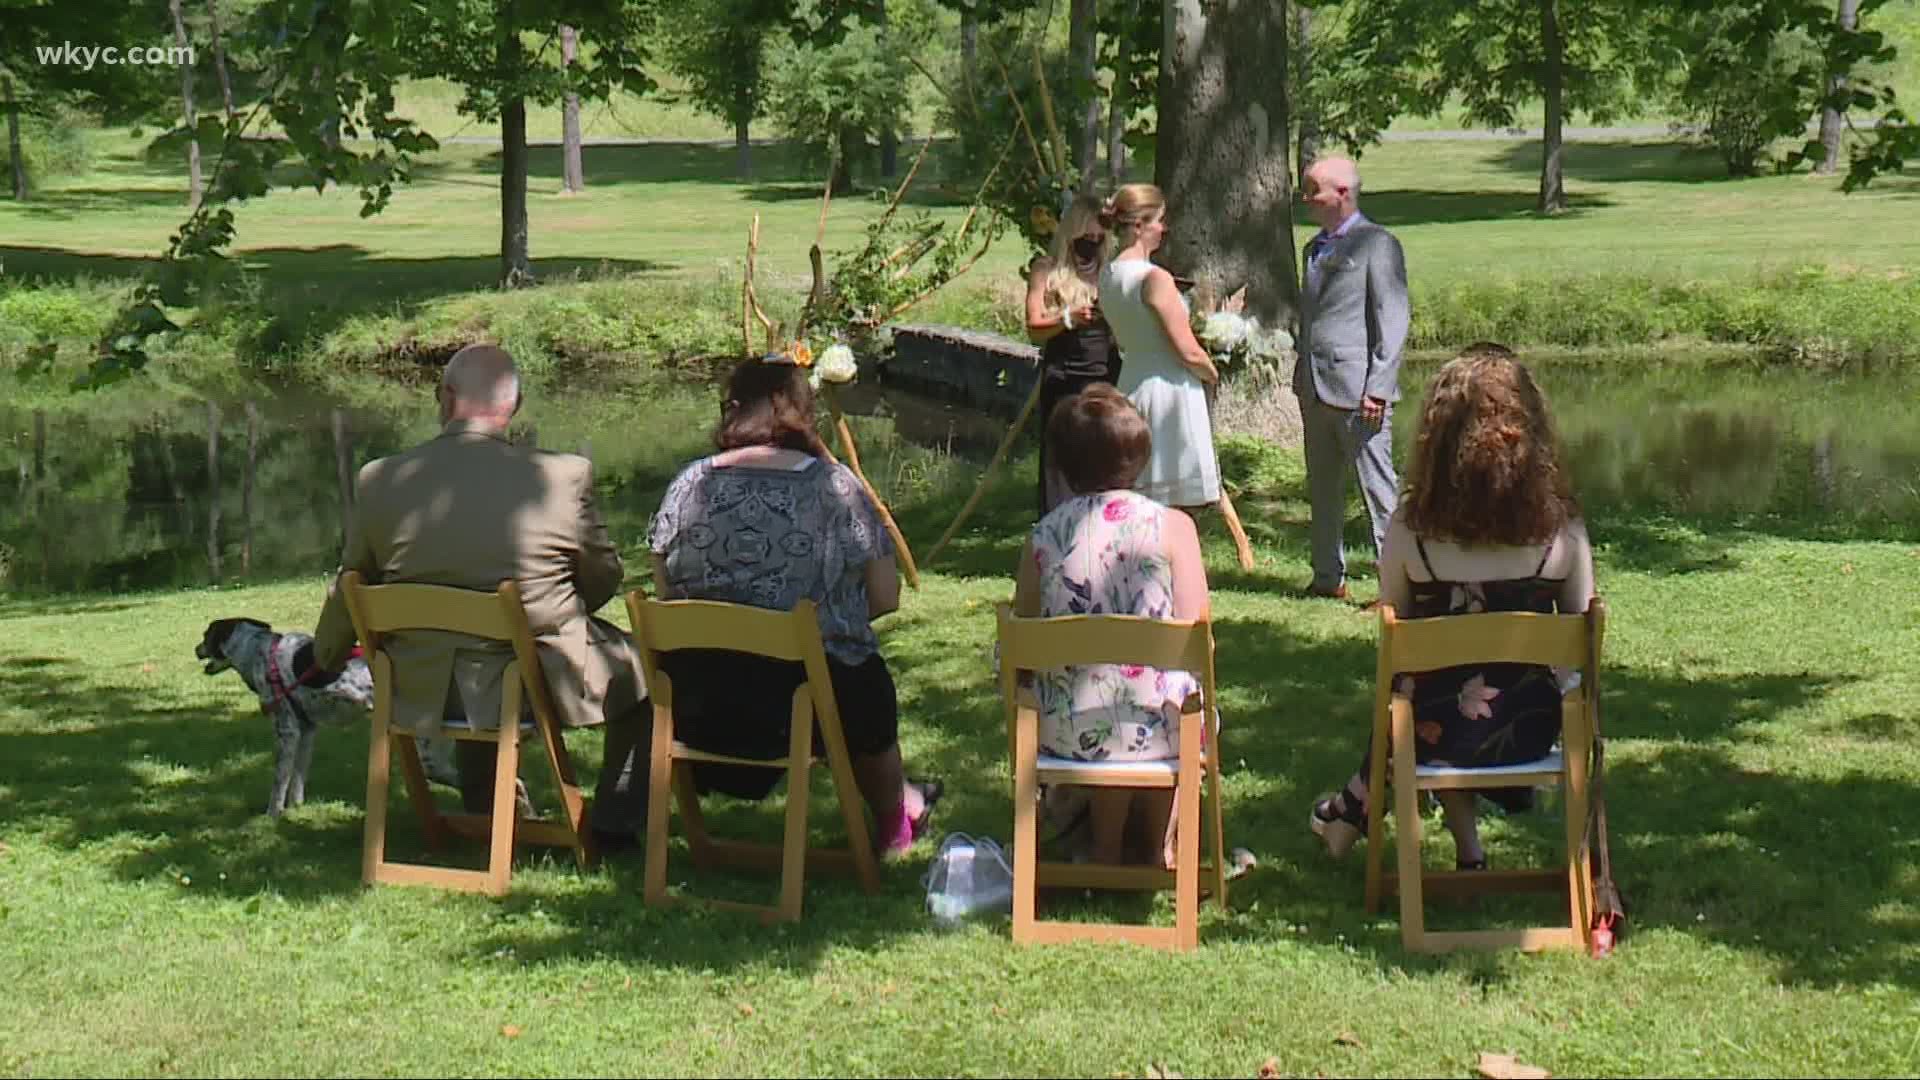 There's a new stress-free way for local couples to get married during the pandemic. Pop-up weddings at the Cuyahoga Valley National Park.